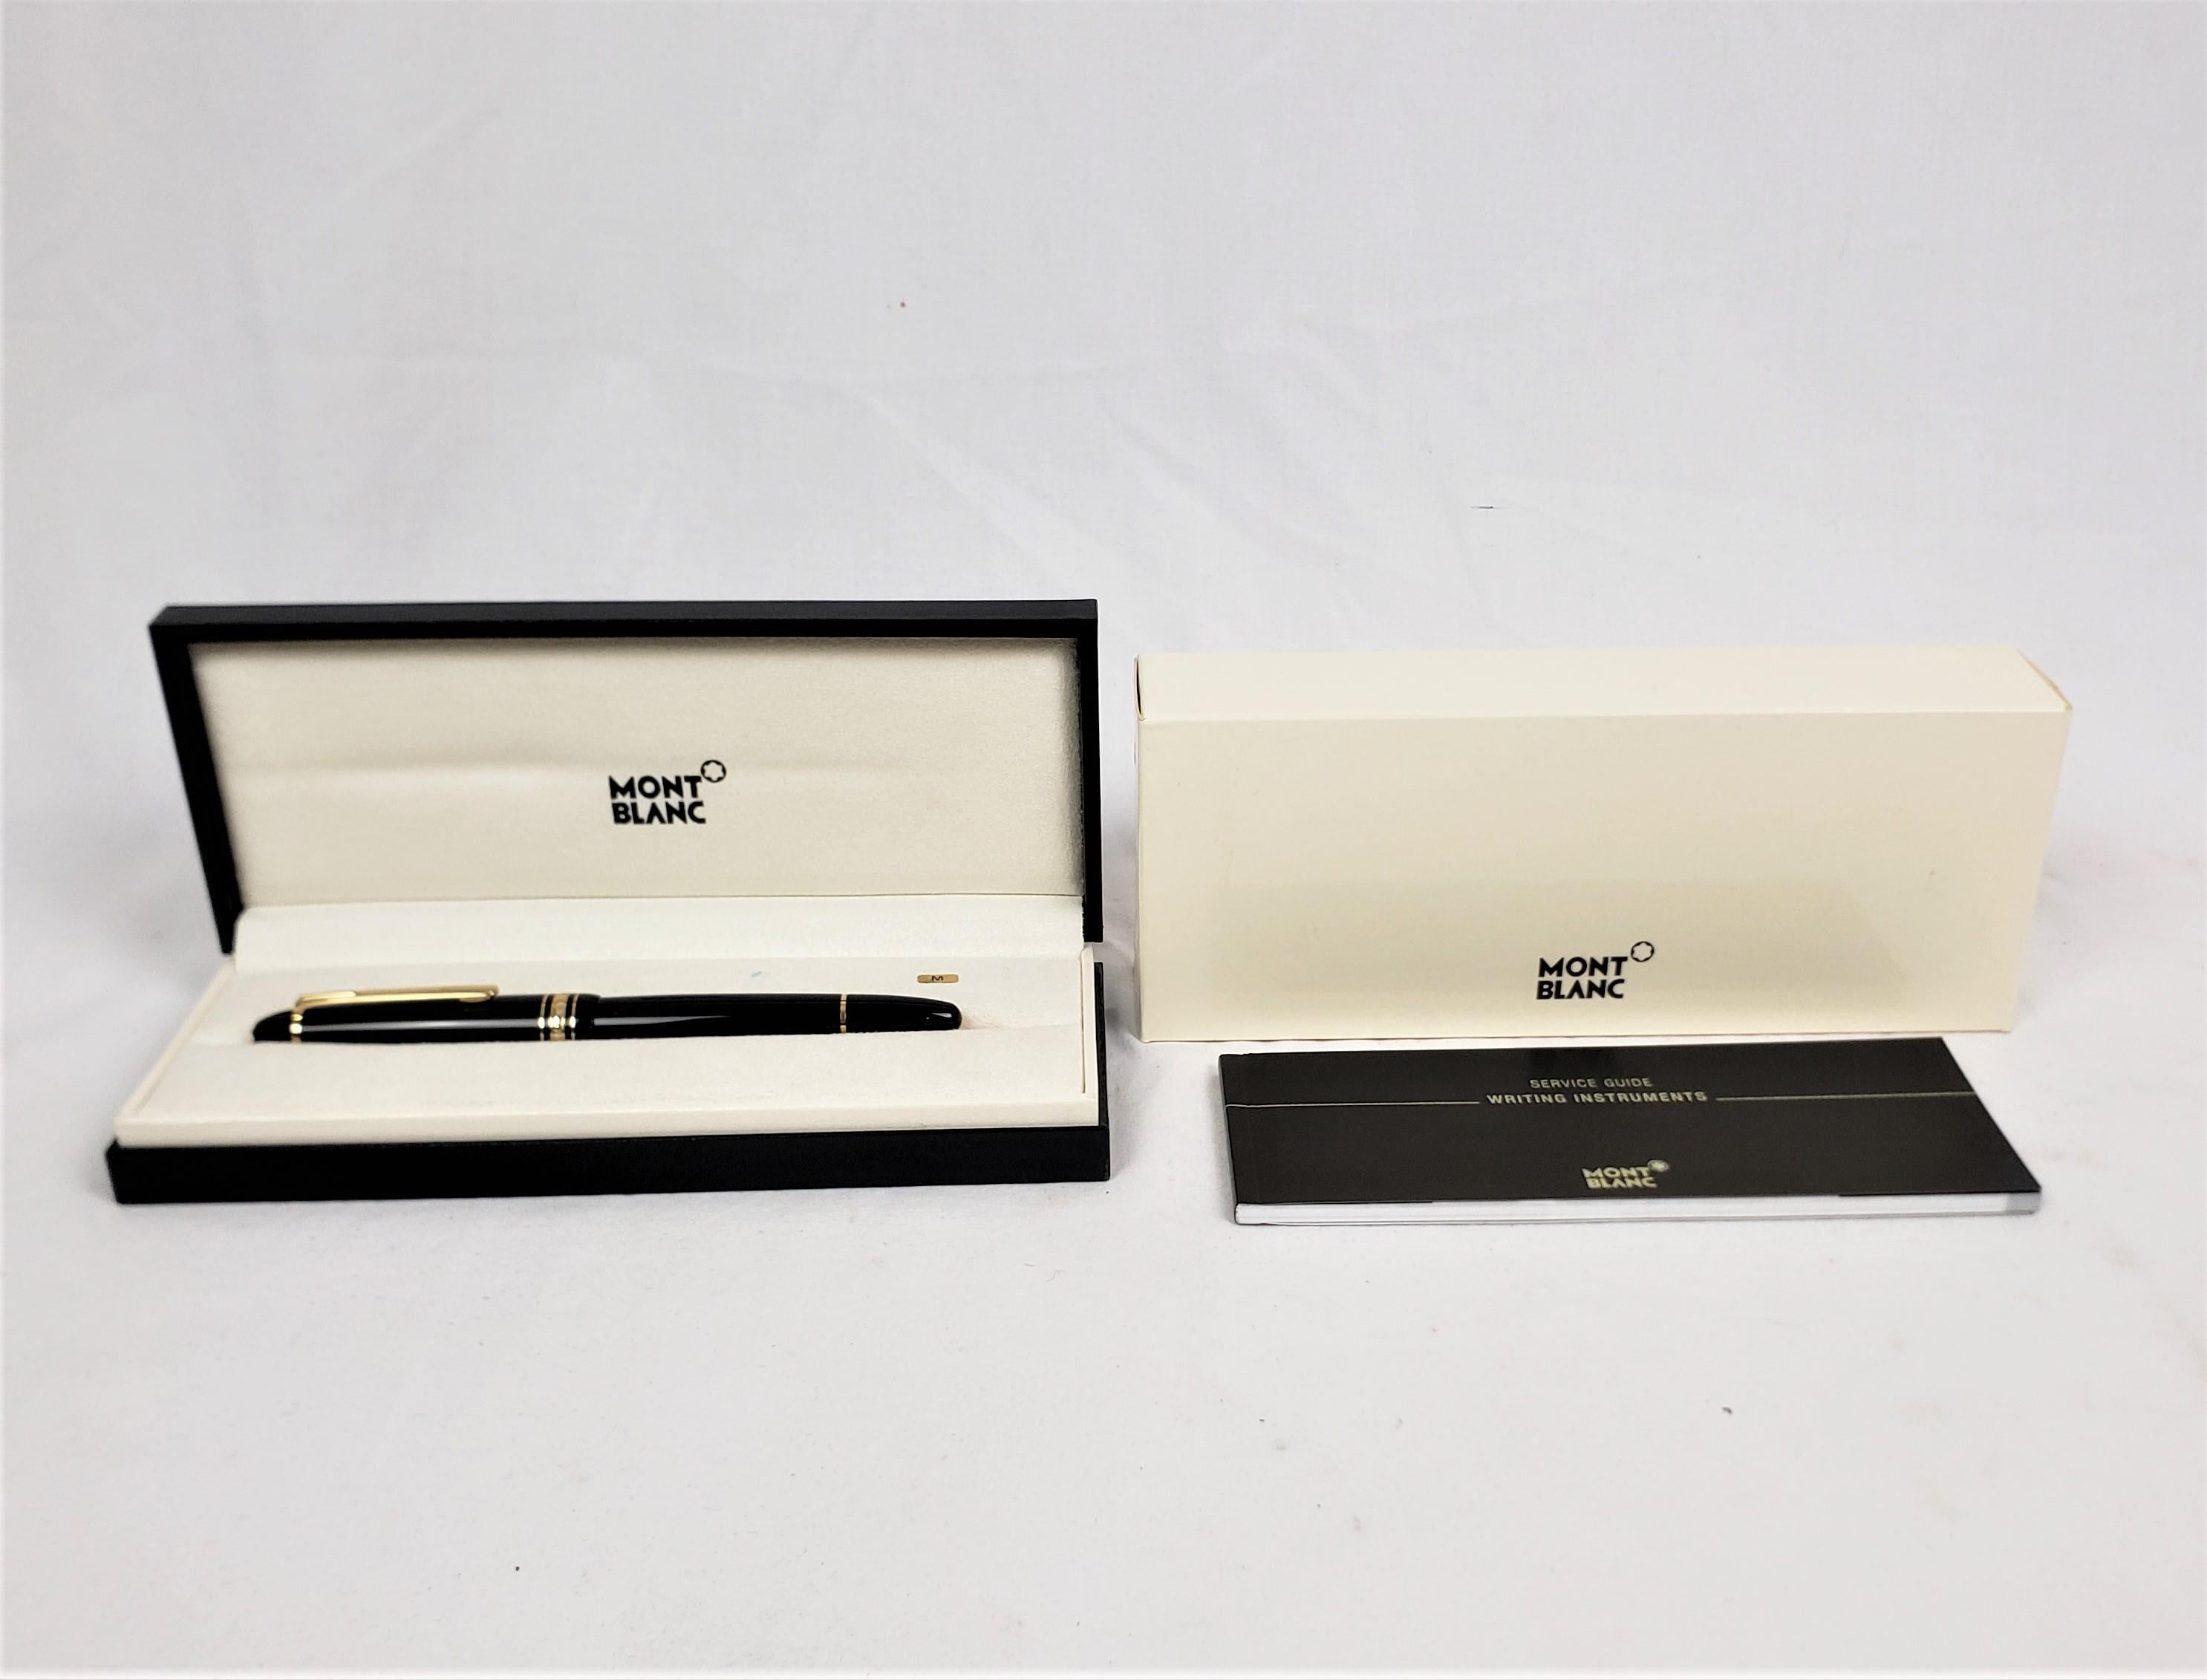 This fountain pen was made by the well known Montblanc factory of Germany in approximately 1990 in their classic modern style. This fountain pen is their 'Meisterstuck' model and has a black molded case with gold clip and band, and a 14 karat gold